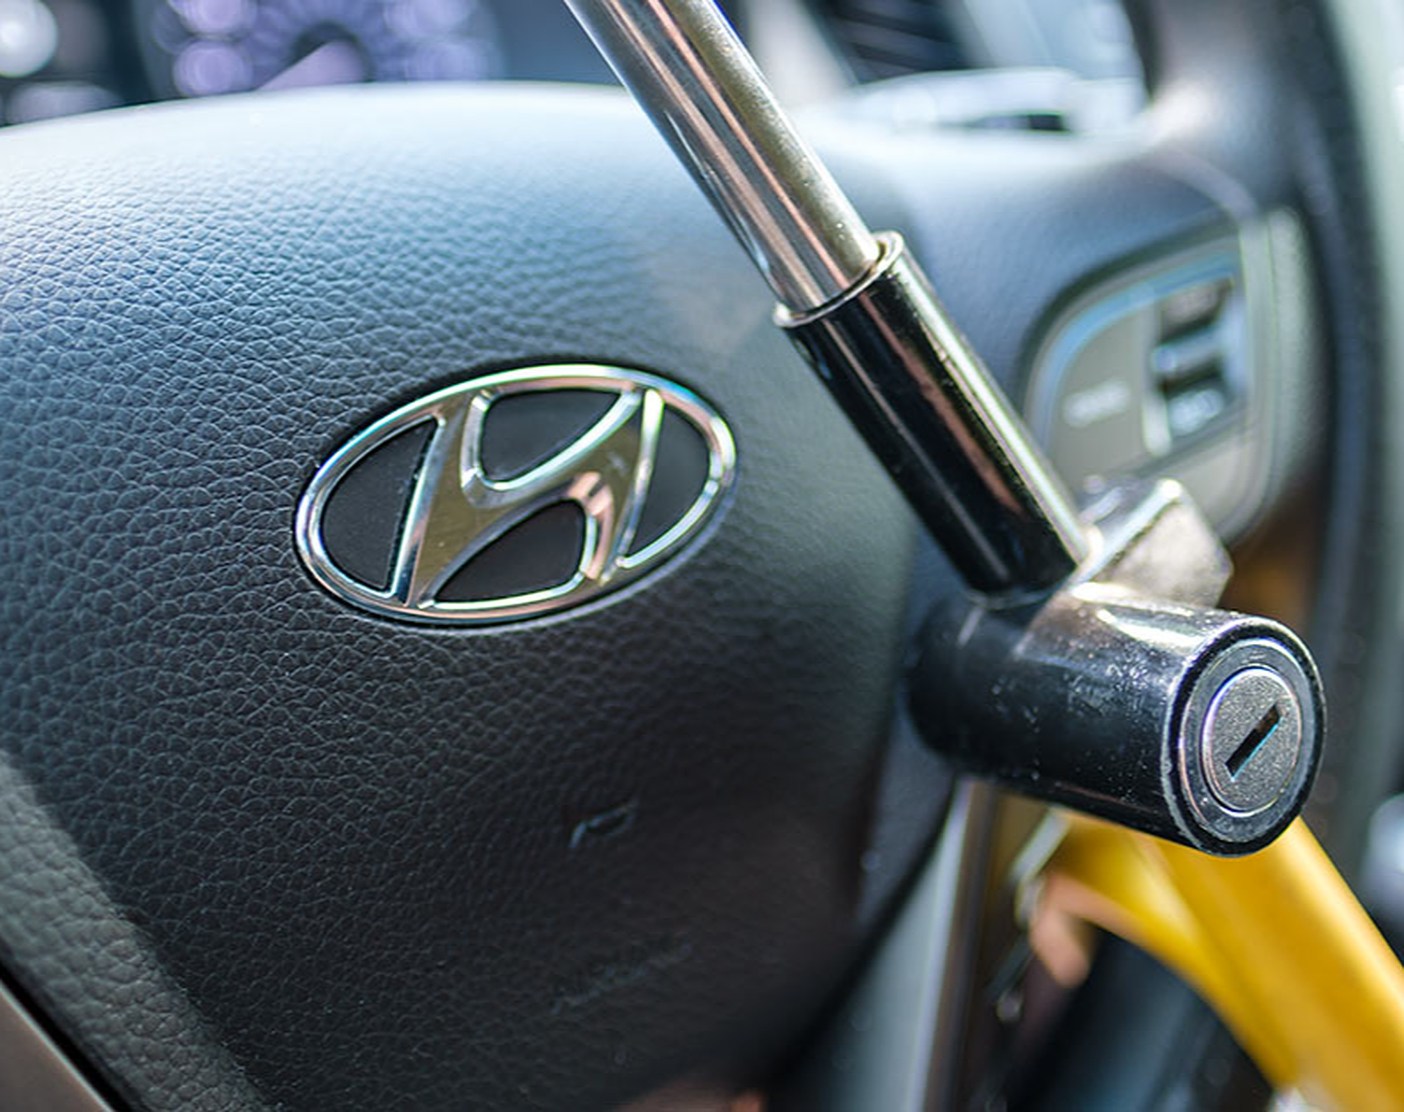 Hyundai And Kia Vehicles Are Easy Targets For Thefts, Study Finds